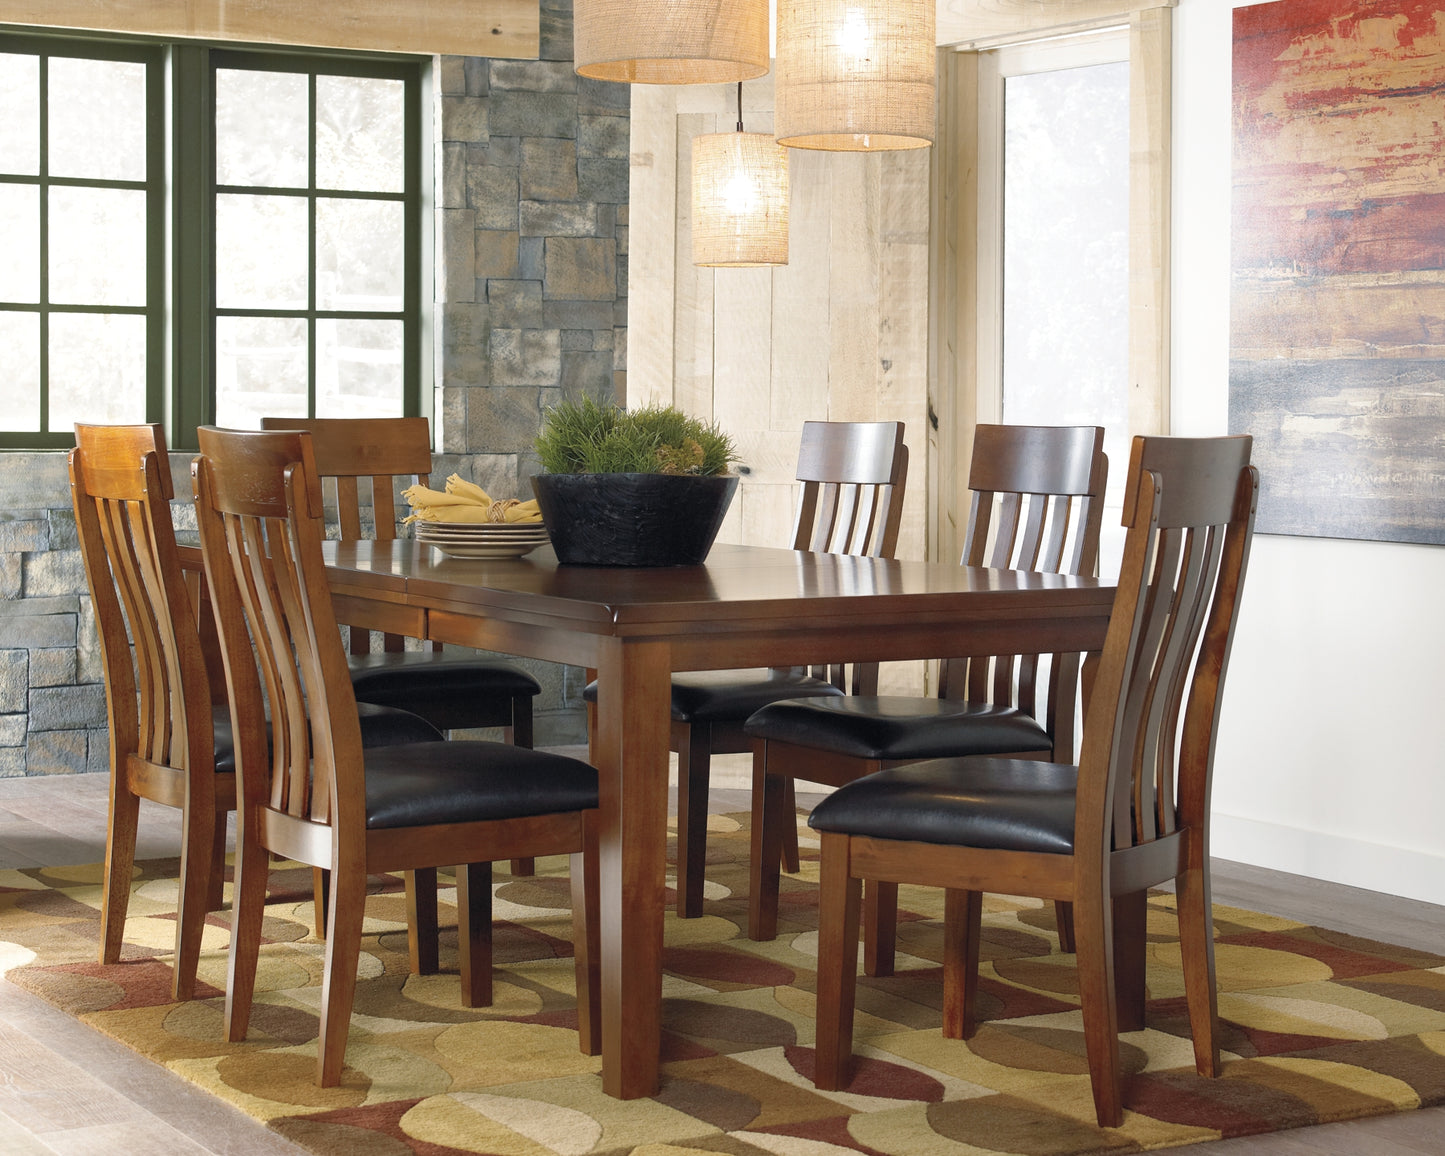 Ralene Dining Table and 8 Chairs